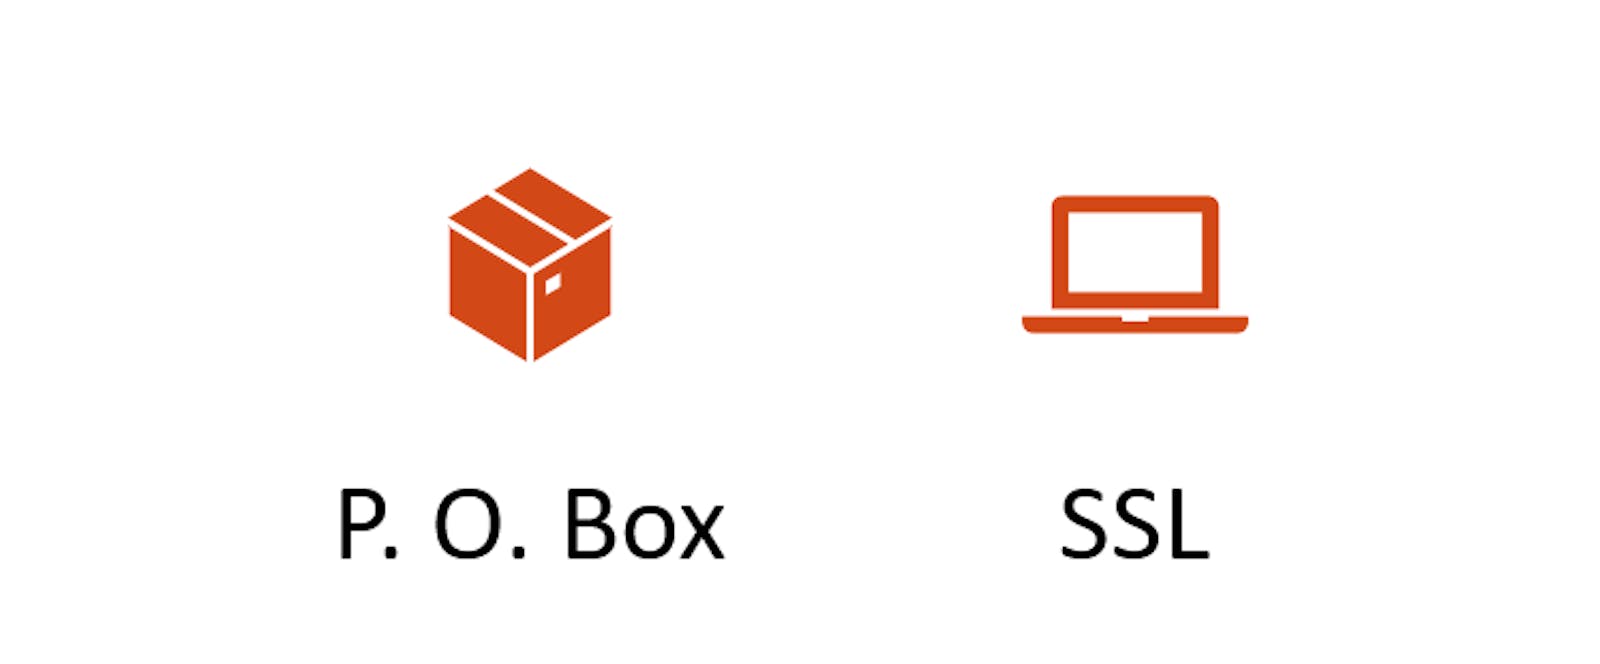 Exploring Privacy and Security: Comparing SSL Certificates to P.O. Boxes